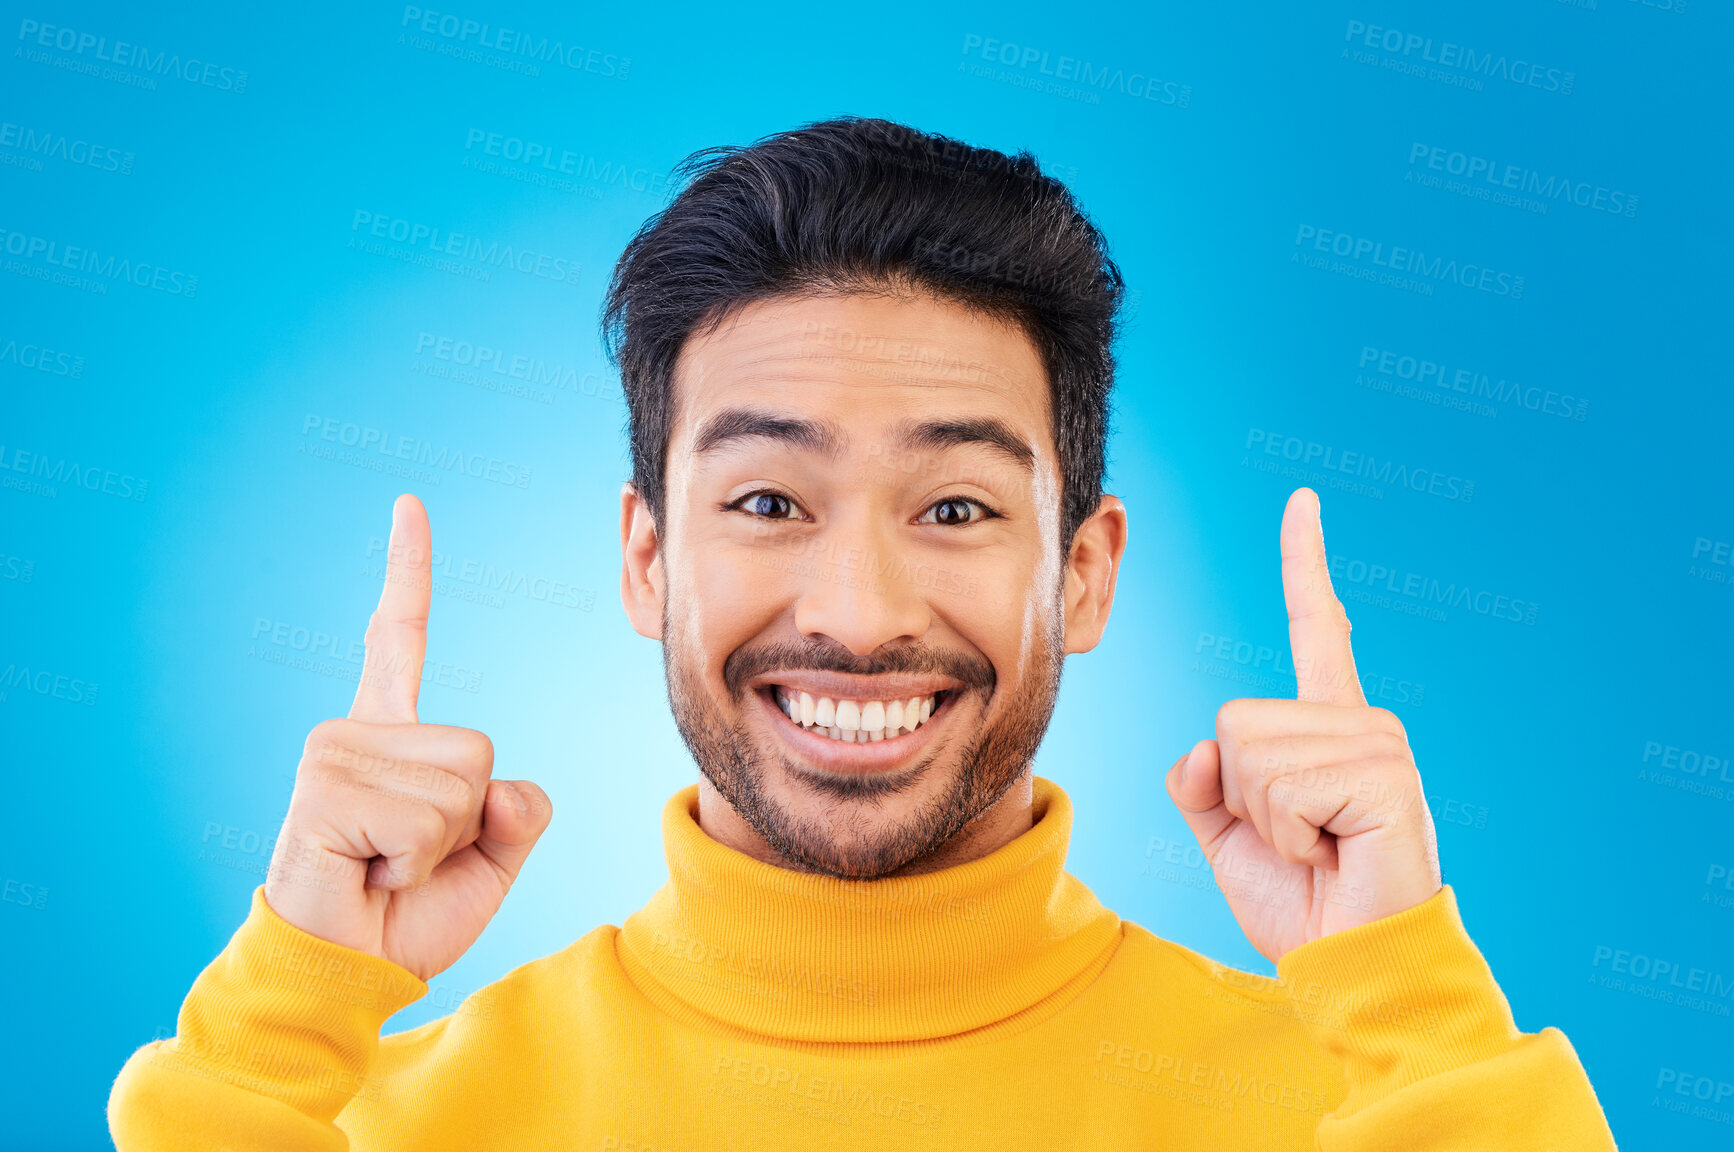 Buy stock photo Pointing up, excited and portrait of Asian man on blue background for news, announcement and information. Advertising, marketing and face of male person with hand gesture for promotion, deal and sale